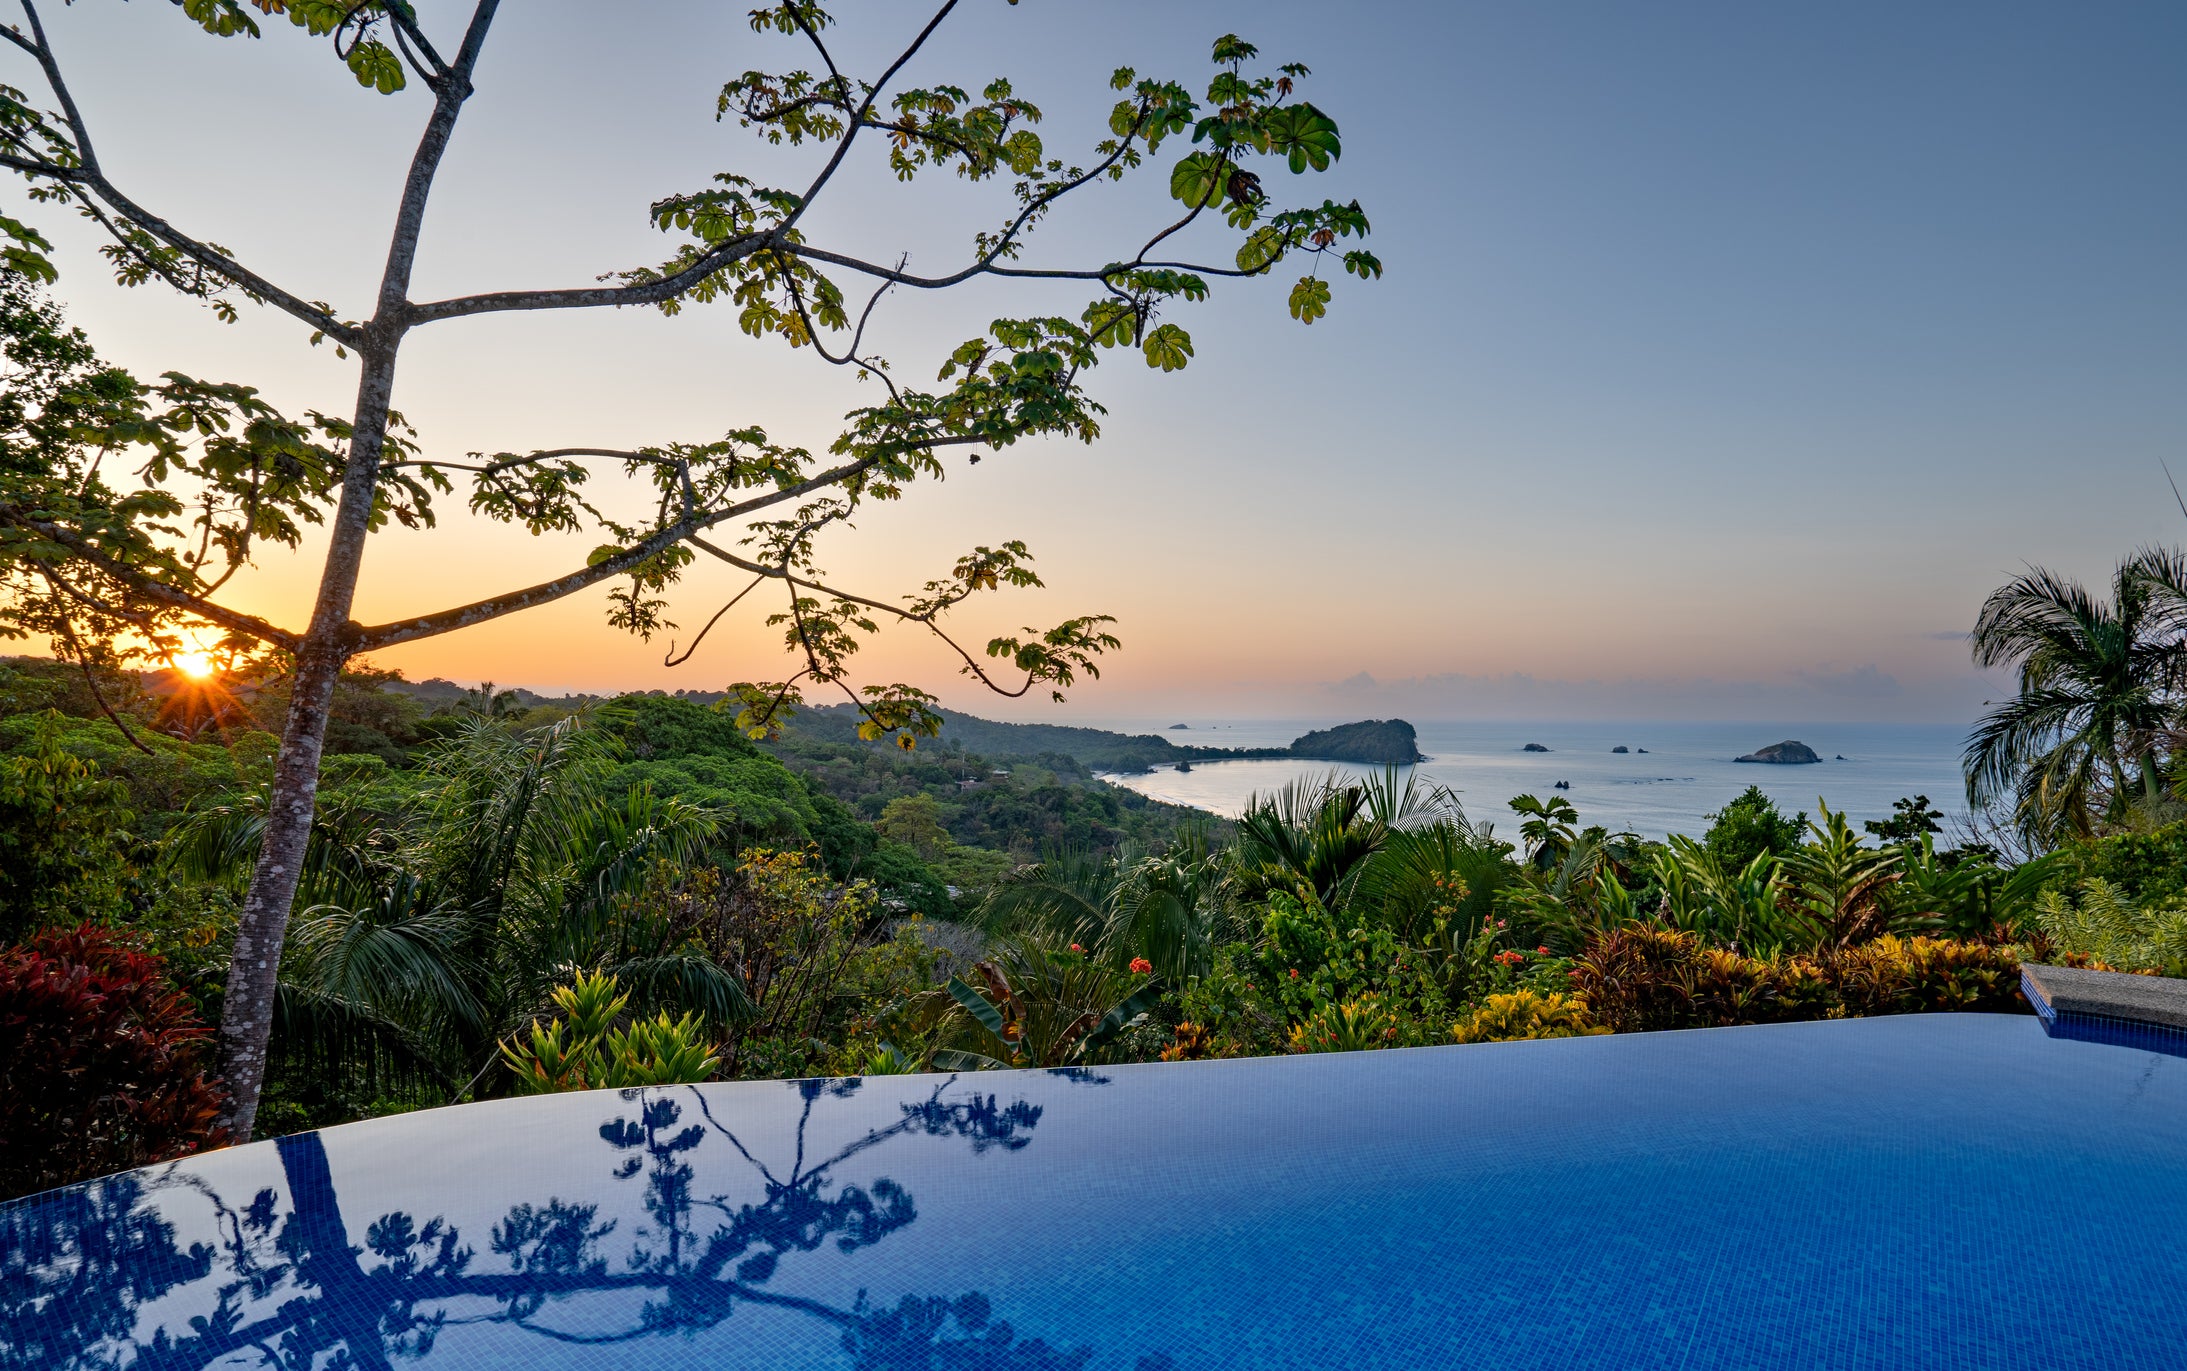 Find a haven of romance in Manuel Antonio National Park